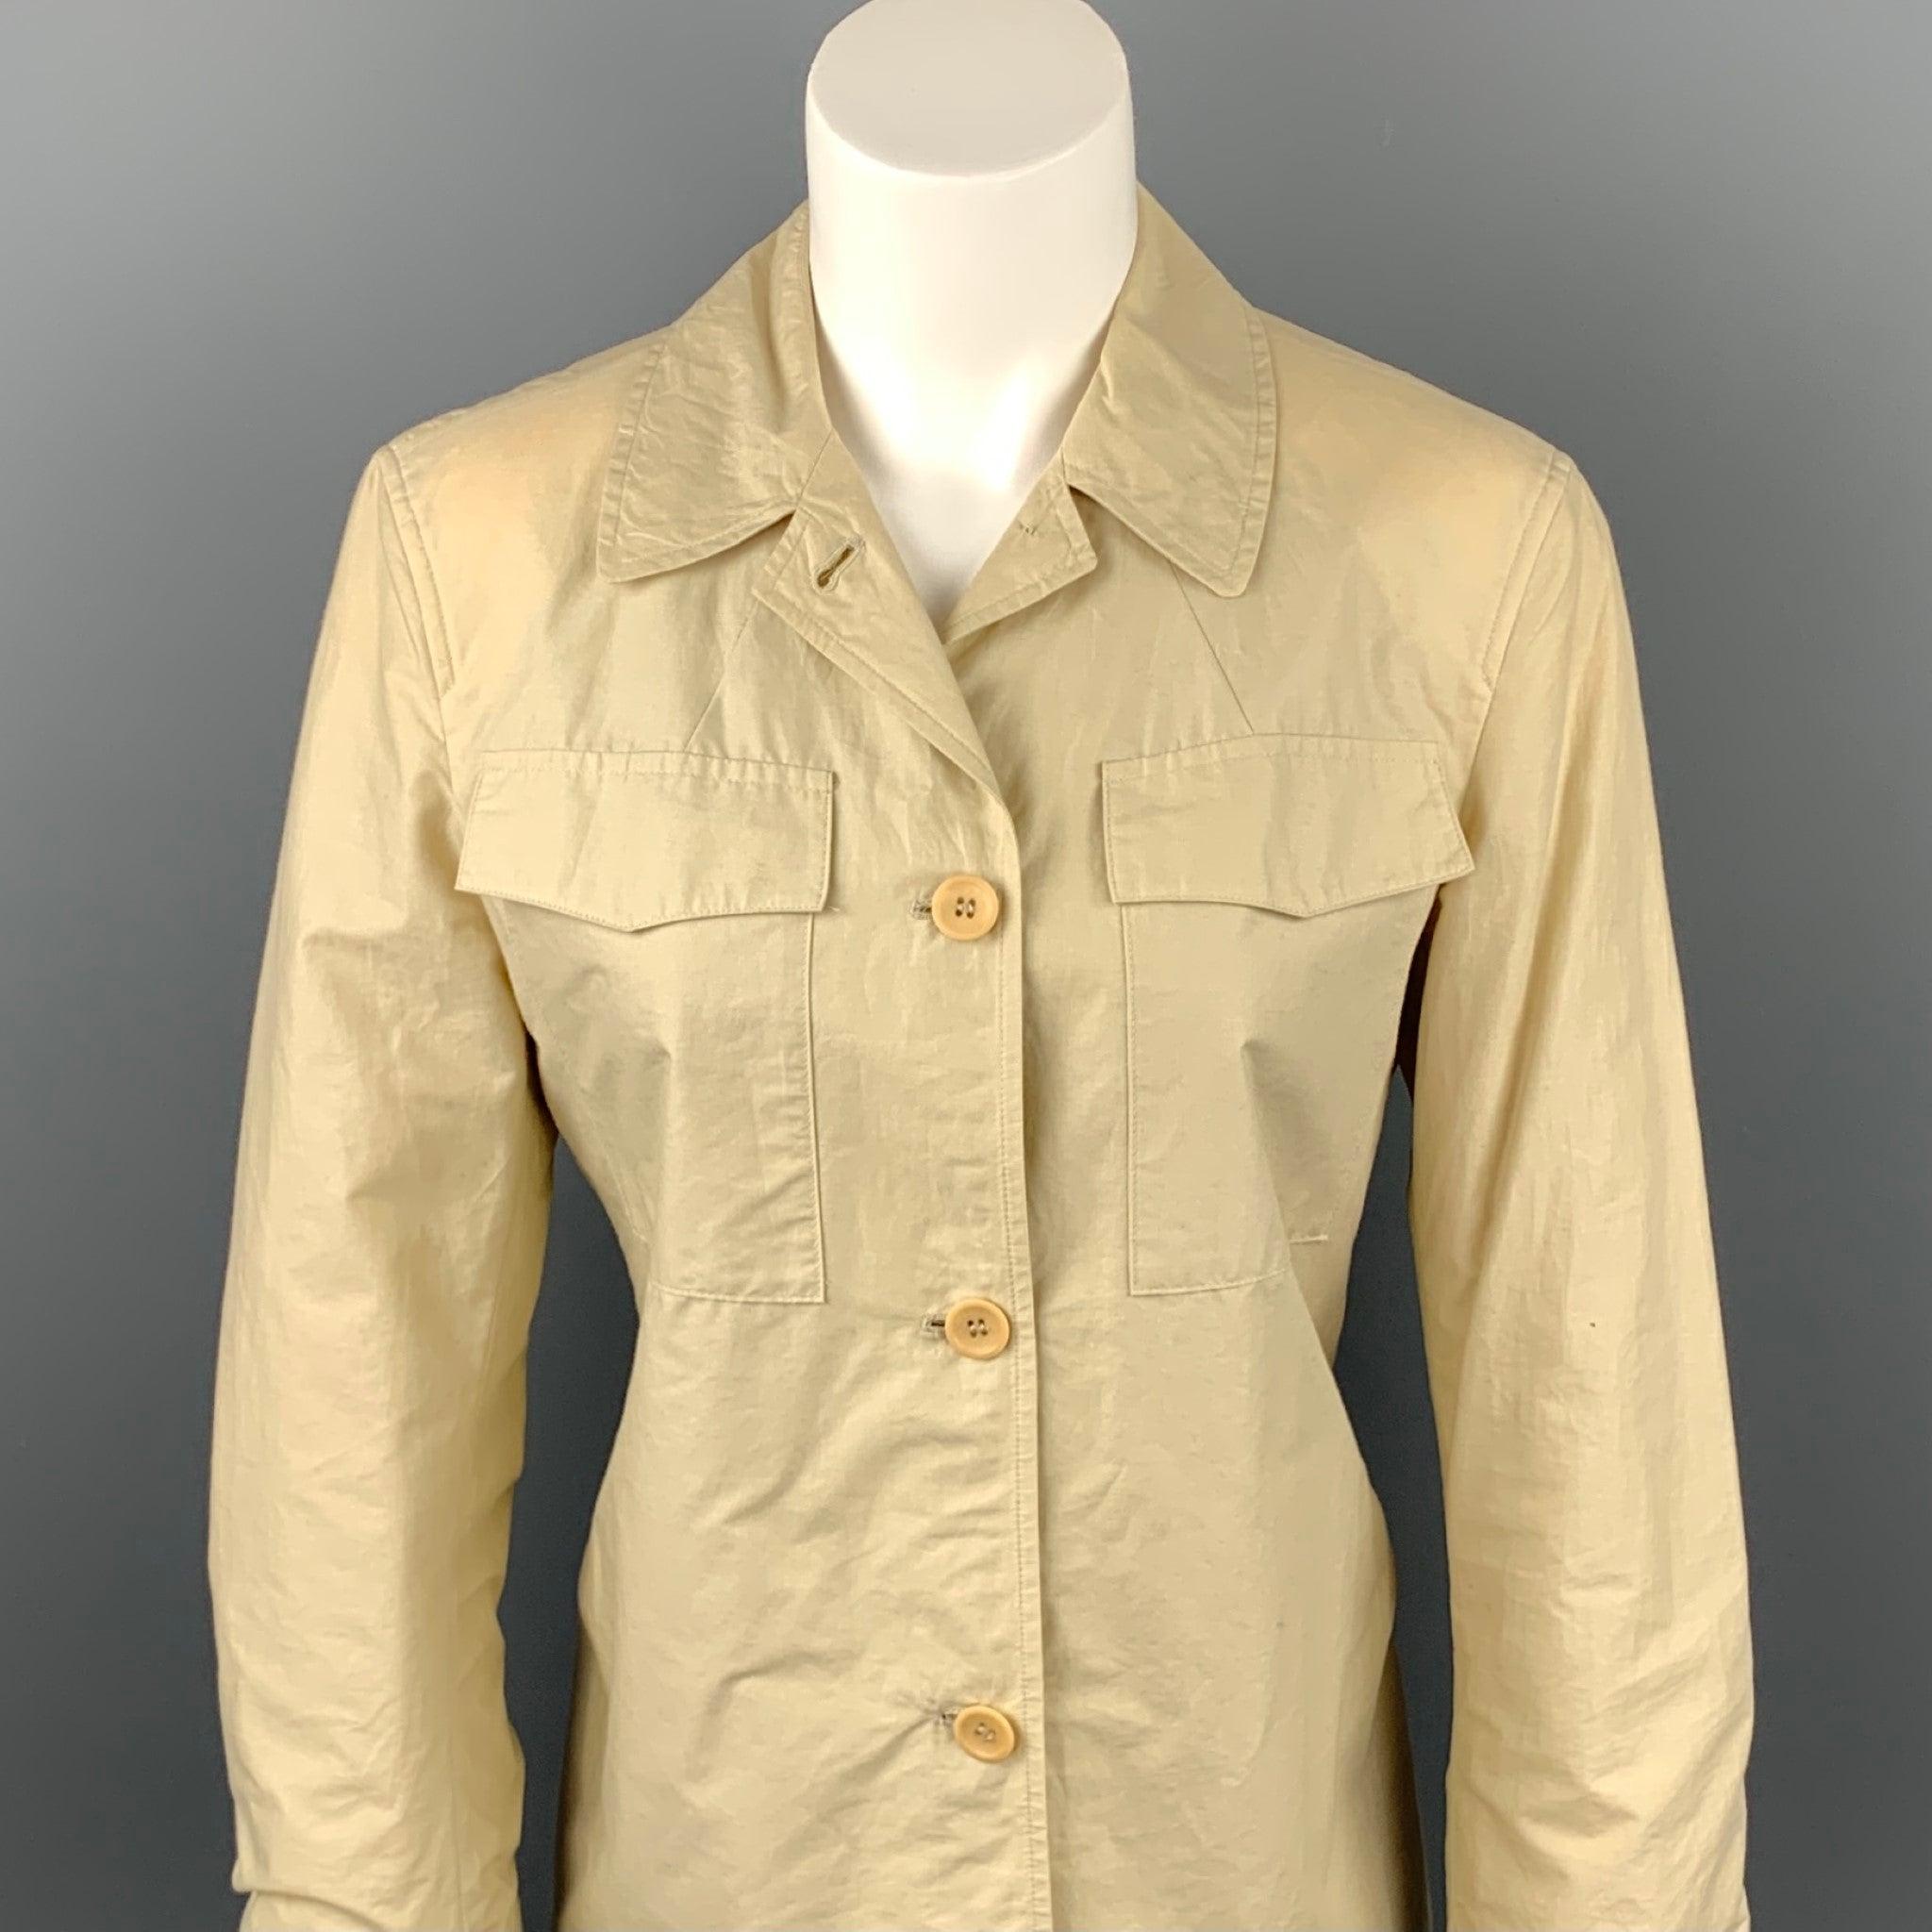 STRENESSE jacket comes in a beige cotton featuring a spread collar, patch pockets, and a buttoned closure. Discoloration throughout. As-Is.
Fair
Pre-Owned Condition. 

Marked:   US 6 

Measurements: 
 
Shoulder: 16 inches 
Bust: 36 inches 
Sleeve: